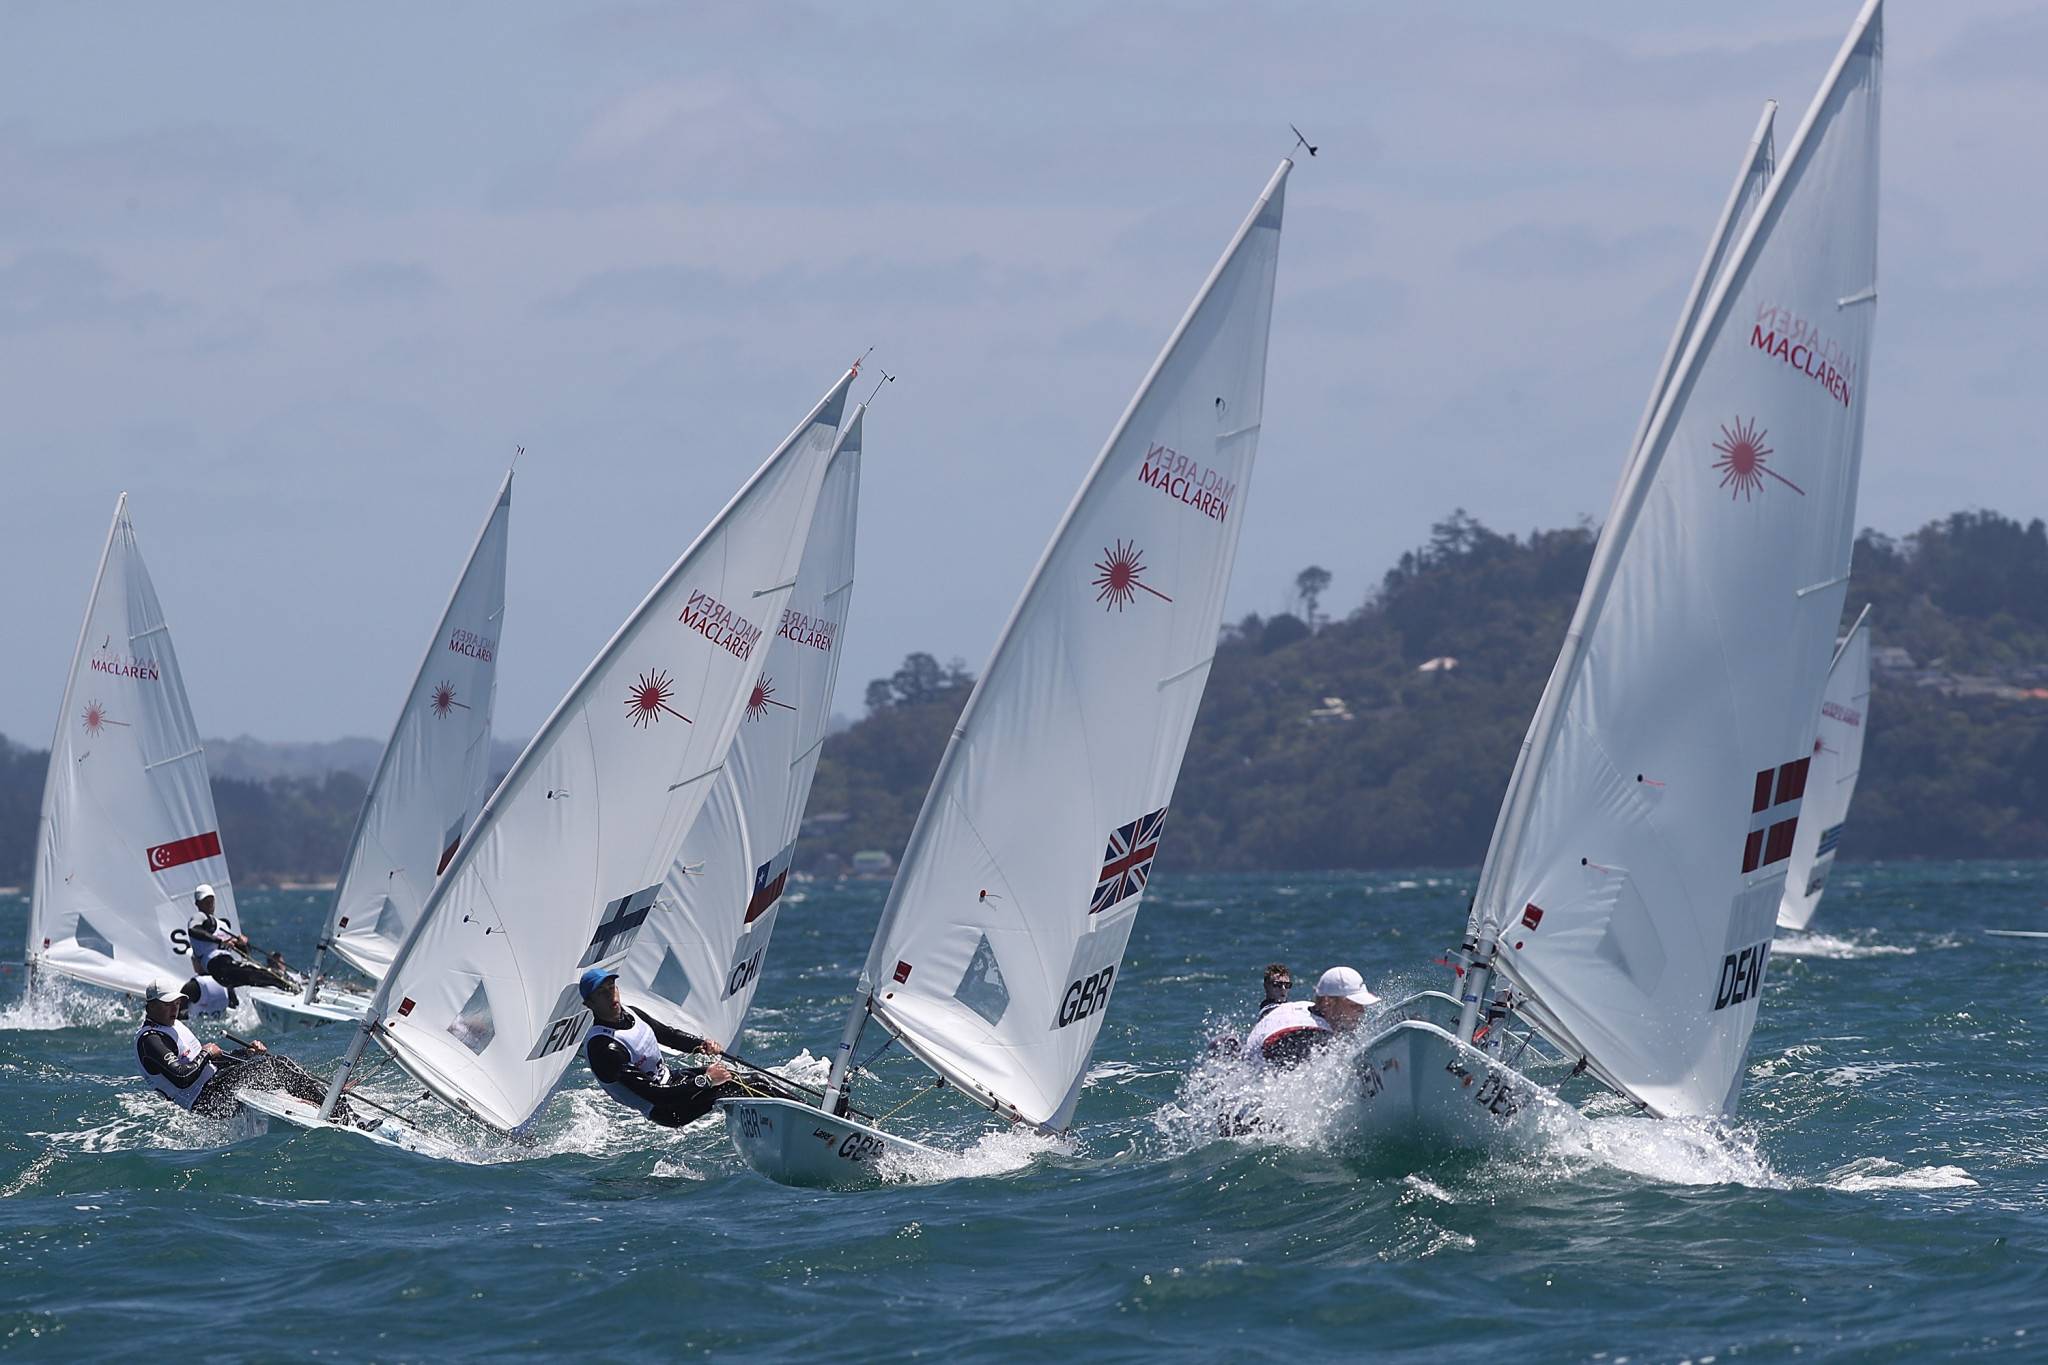 Approximately 450 athletes are set to compete at the Youth World Sailing Championships in The Hague ©Getty Images